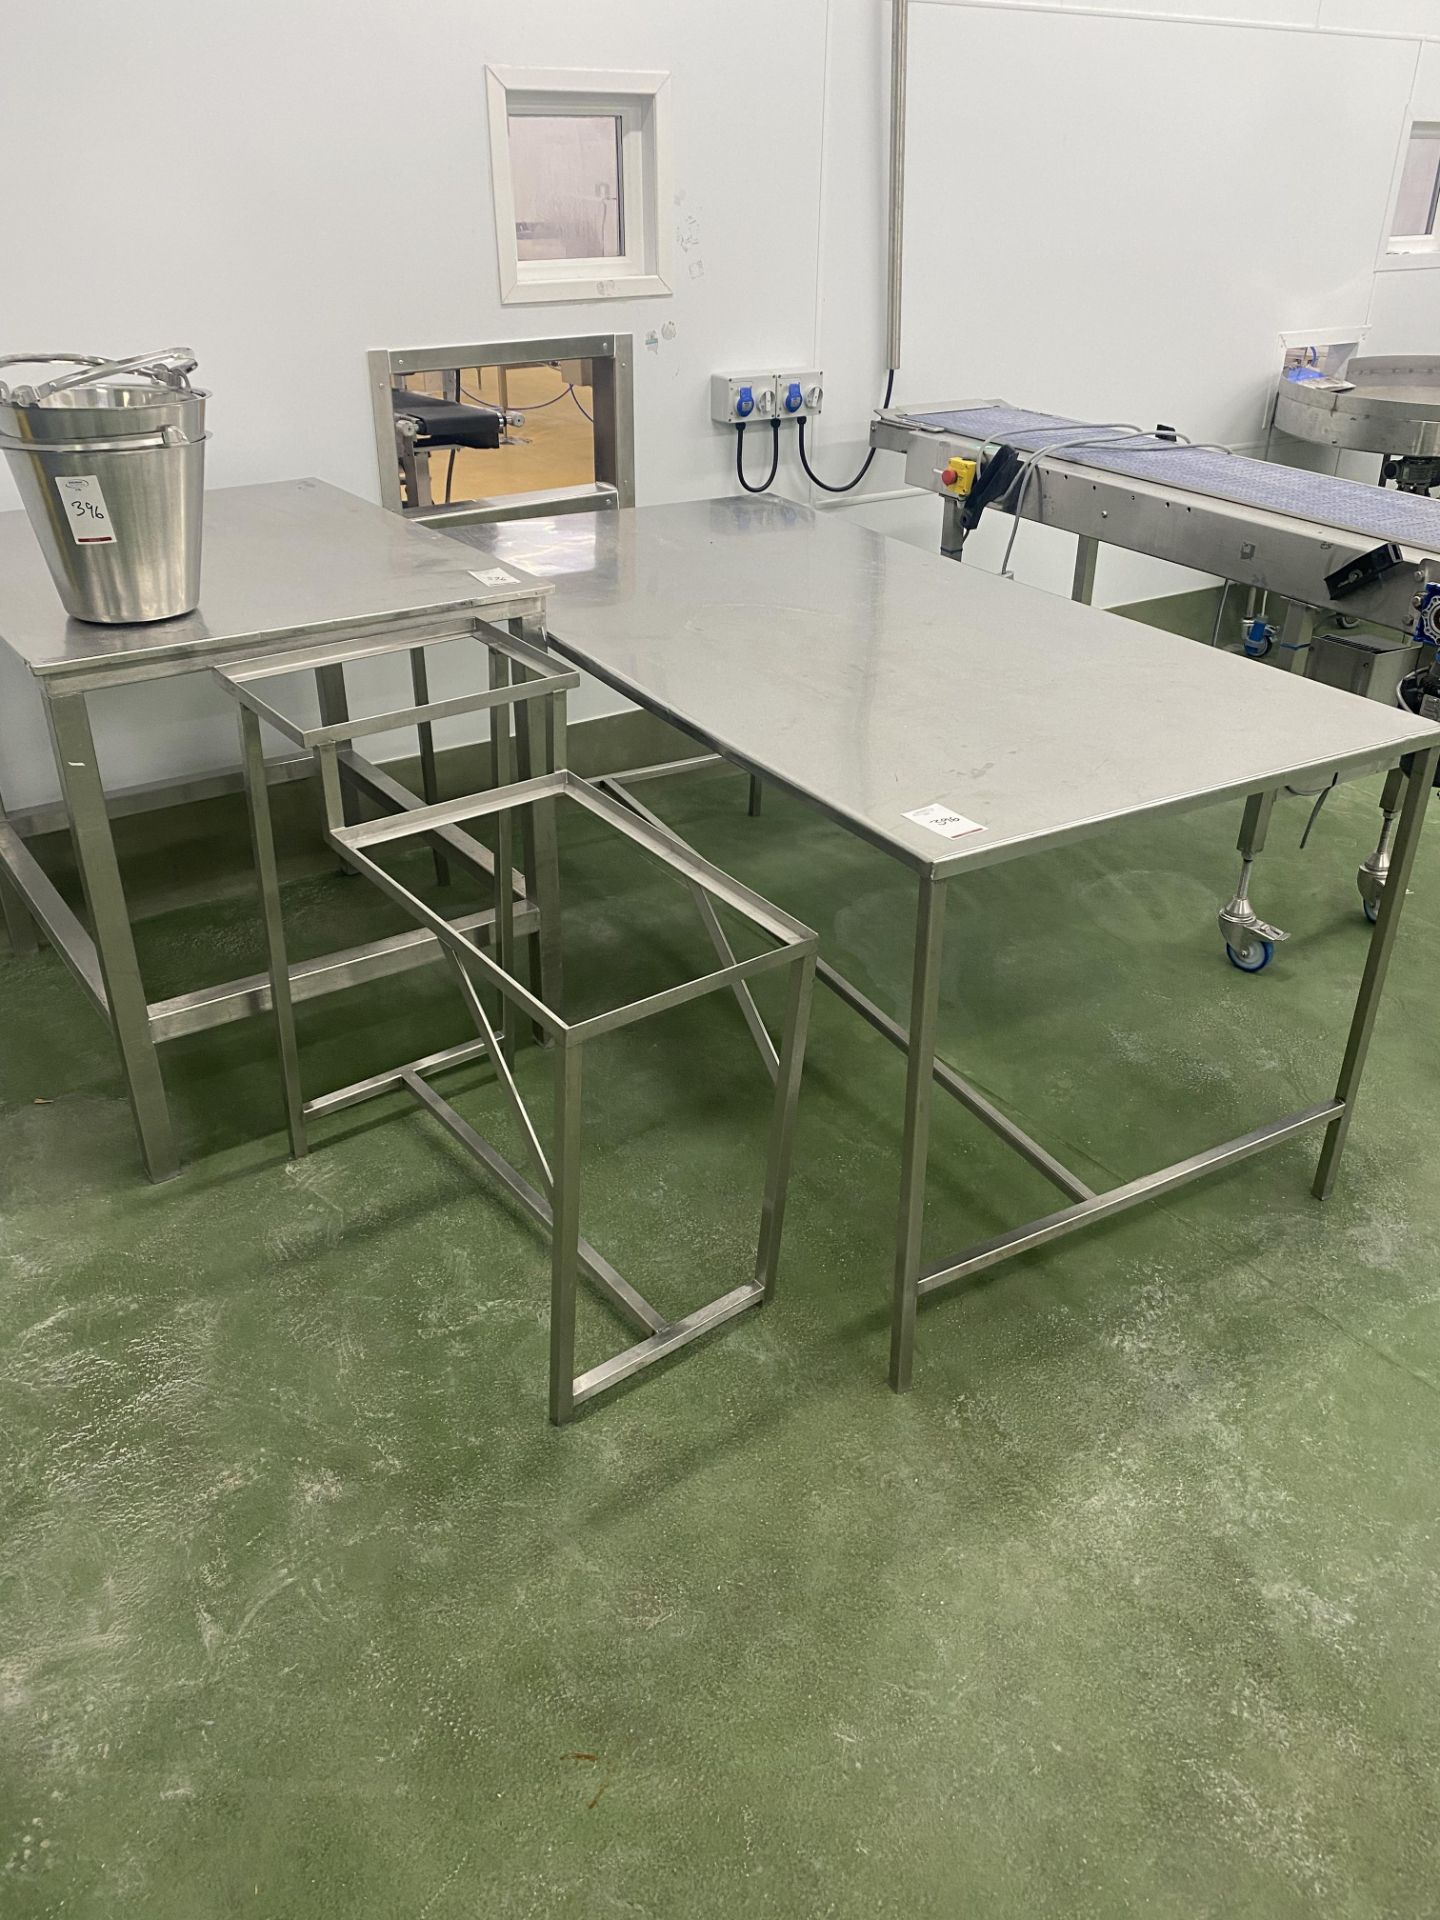 Stainless steel preparation bench , stainless steel preparation table , 3 stainless steel buckets